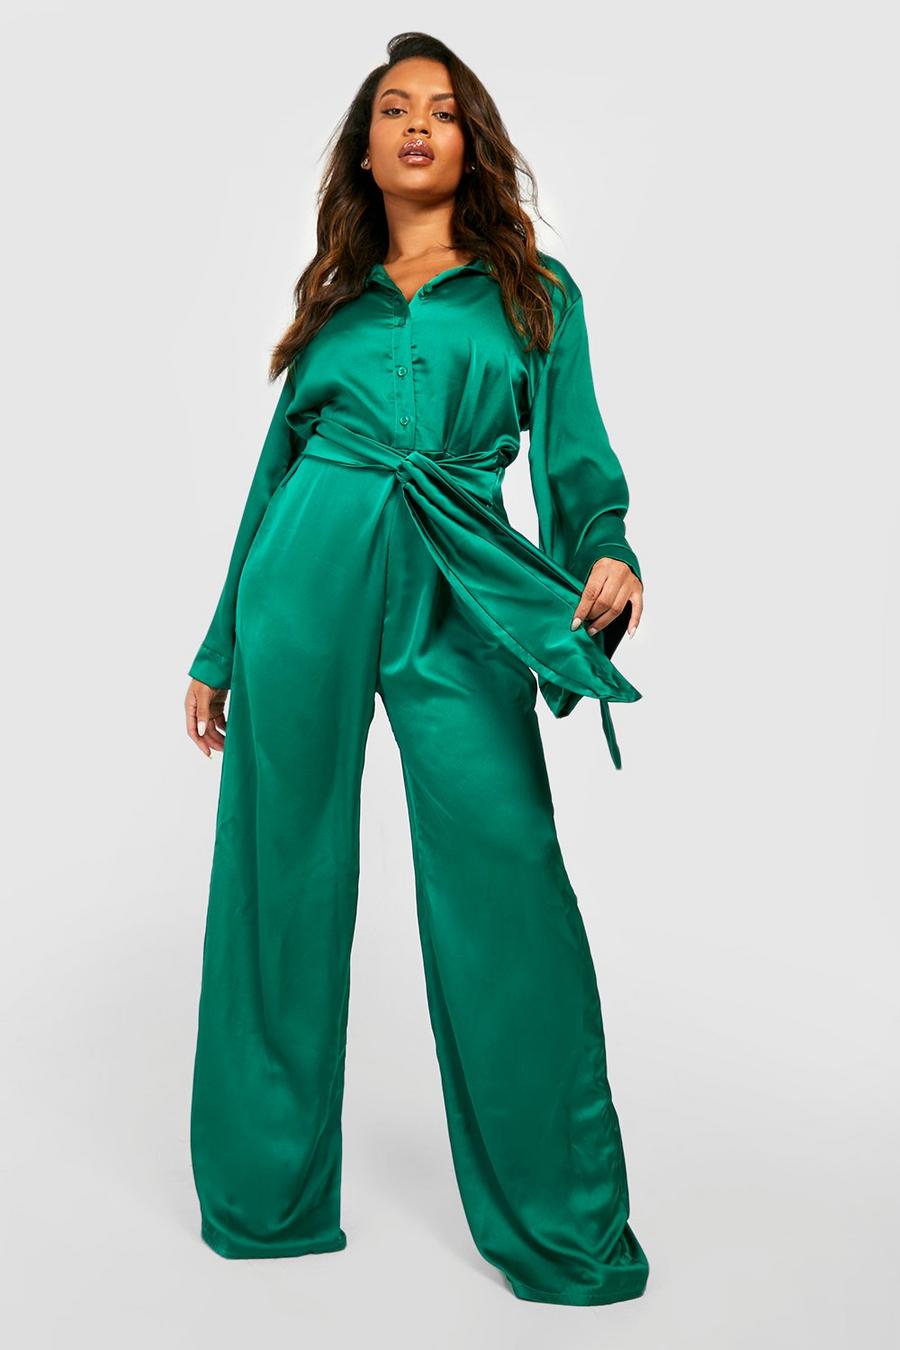 Boohoo Plus Woven Puff Sleeve Belted Taper Jumpsuit in Black Womens Clothing Jumpsuits and rompers Full-length jumpsuits and rompers 